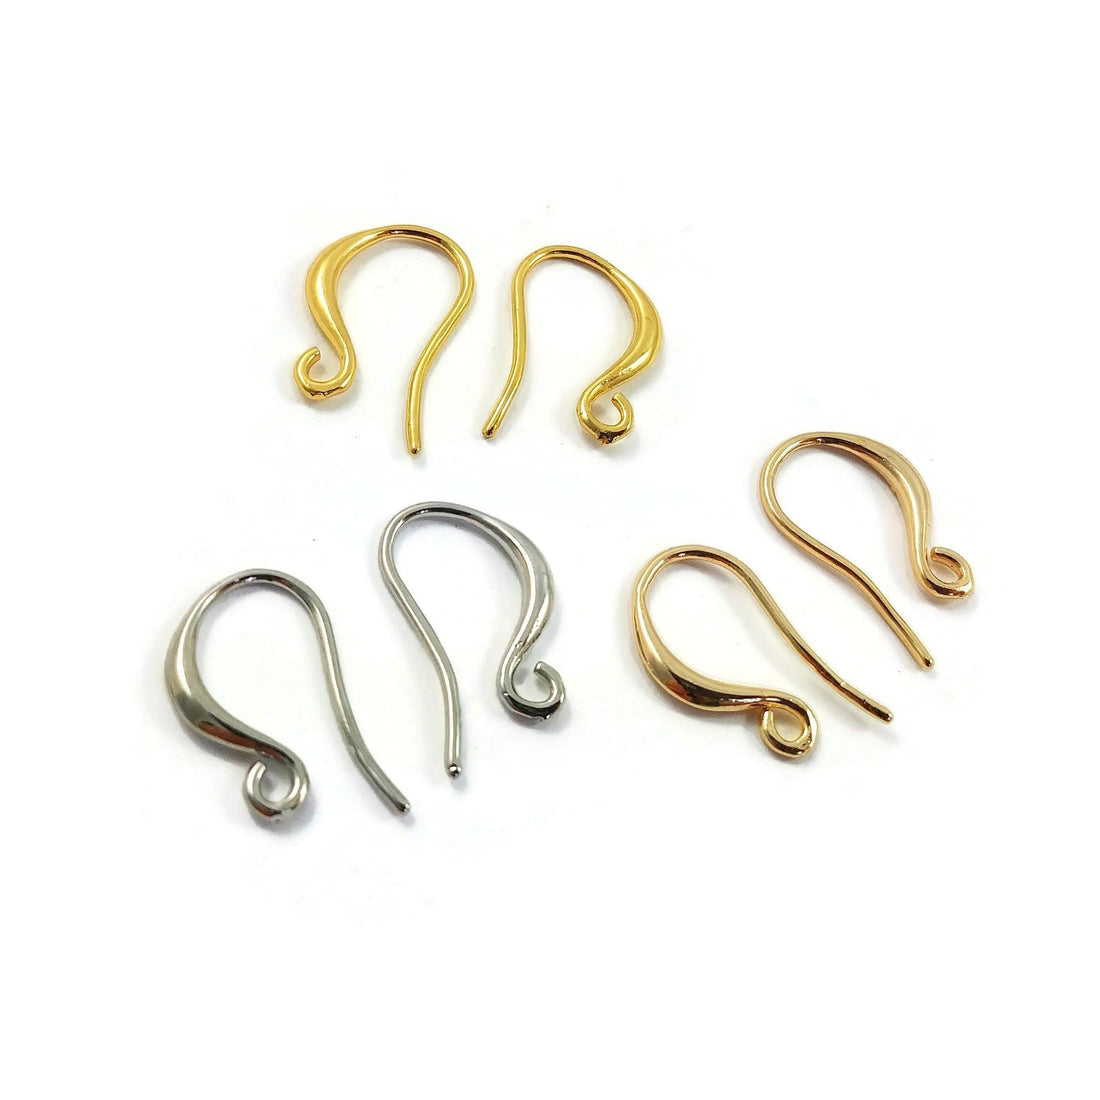 50pcs Pendant Clasp Earring Hooks Stainless Steel Earwires Fish Hook Dangle  Earrings and 50pcs Clear Bullet Earring Back Stoppers and a Box for DIY  Jewelry Making 